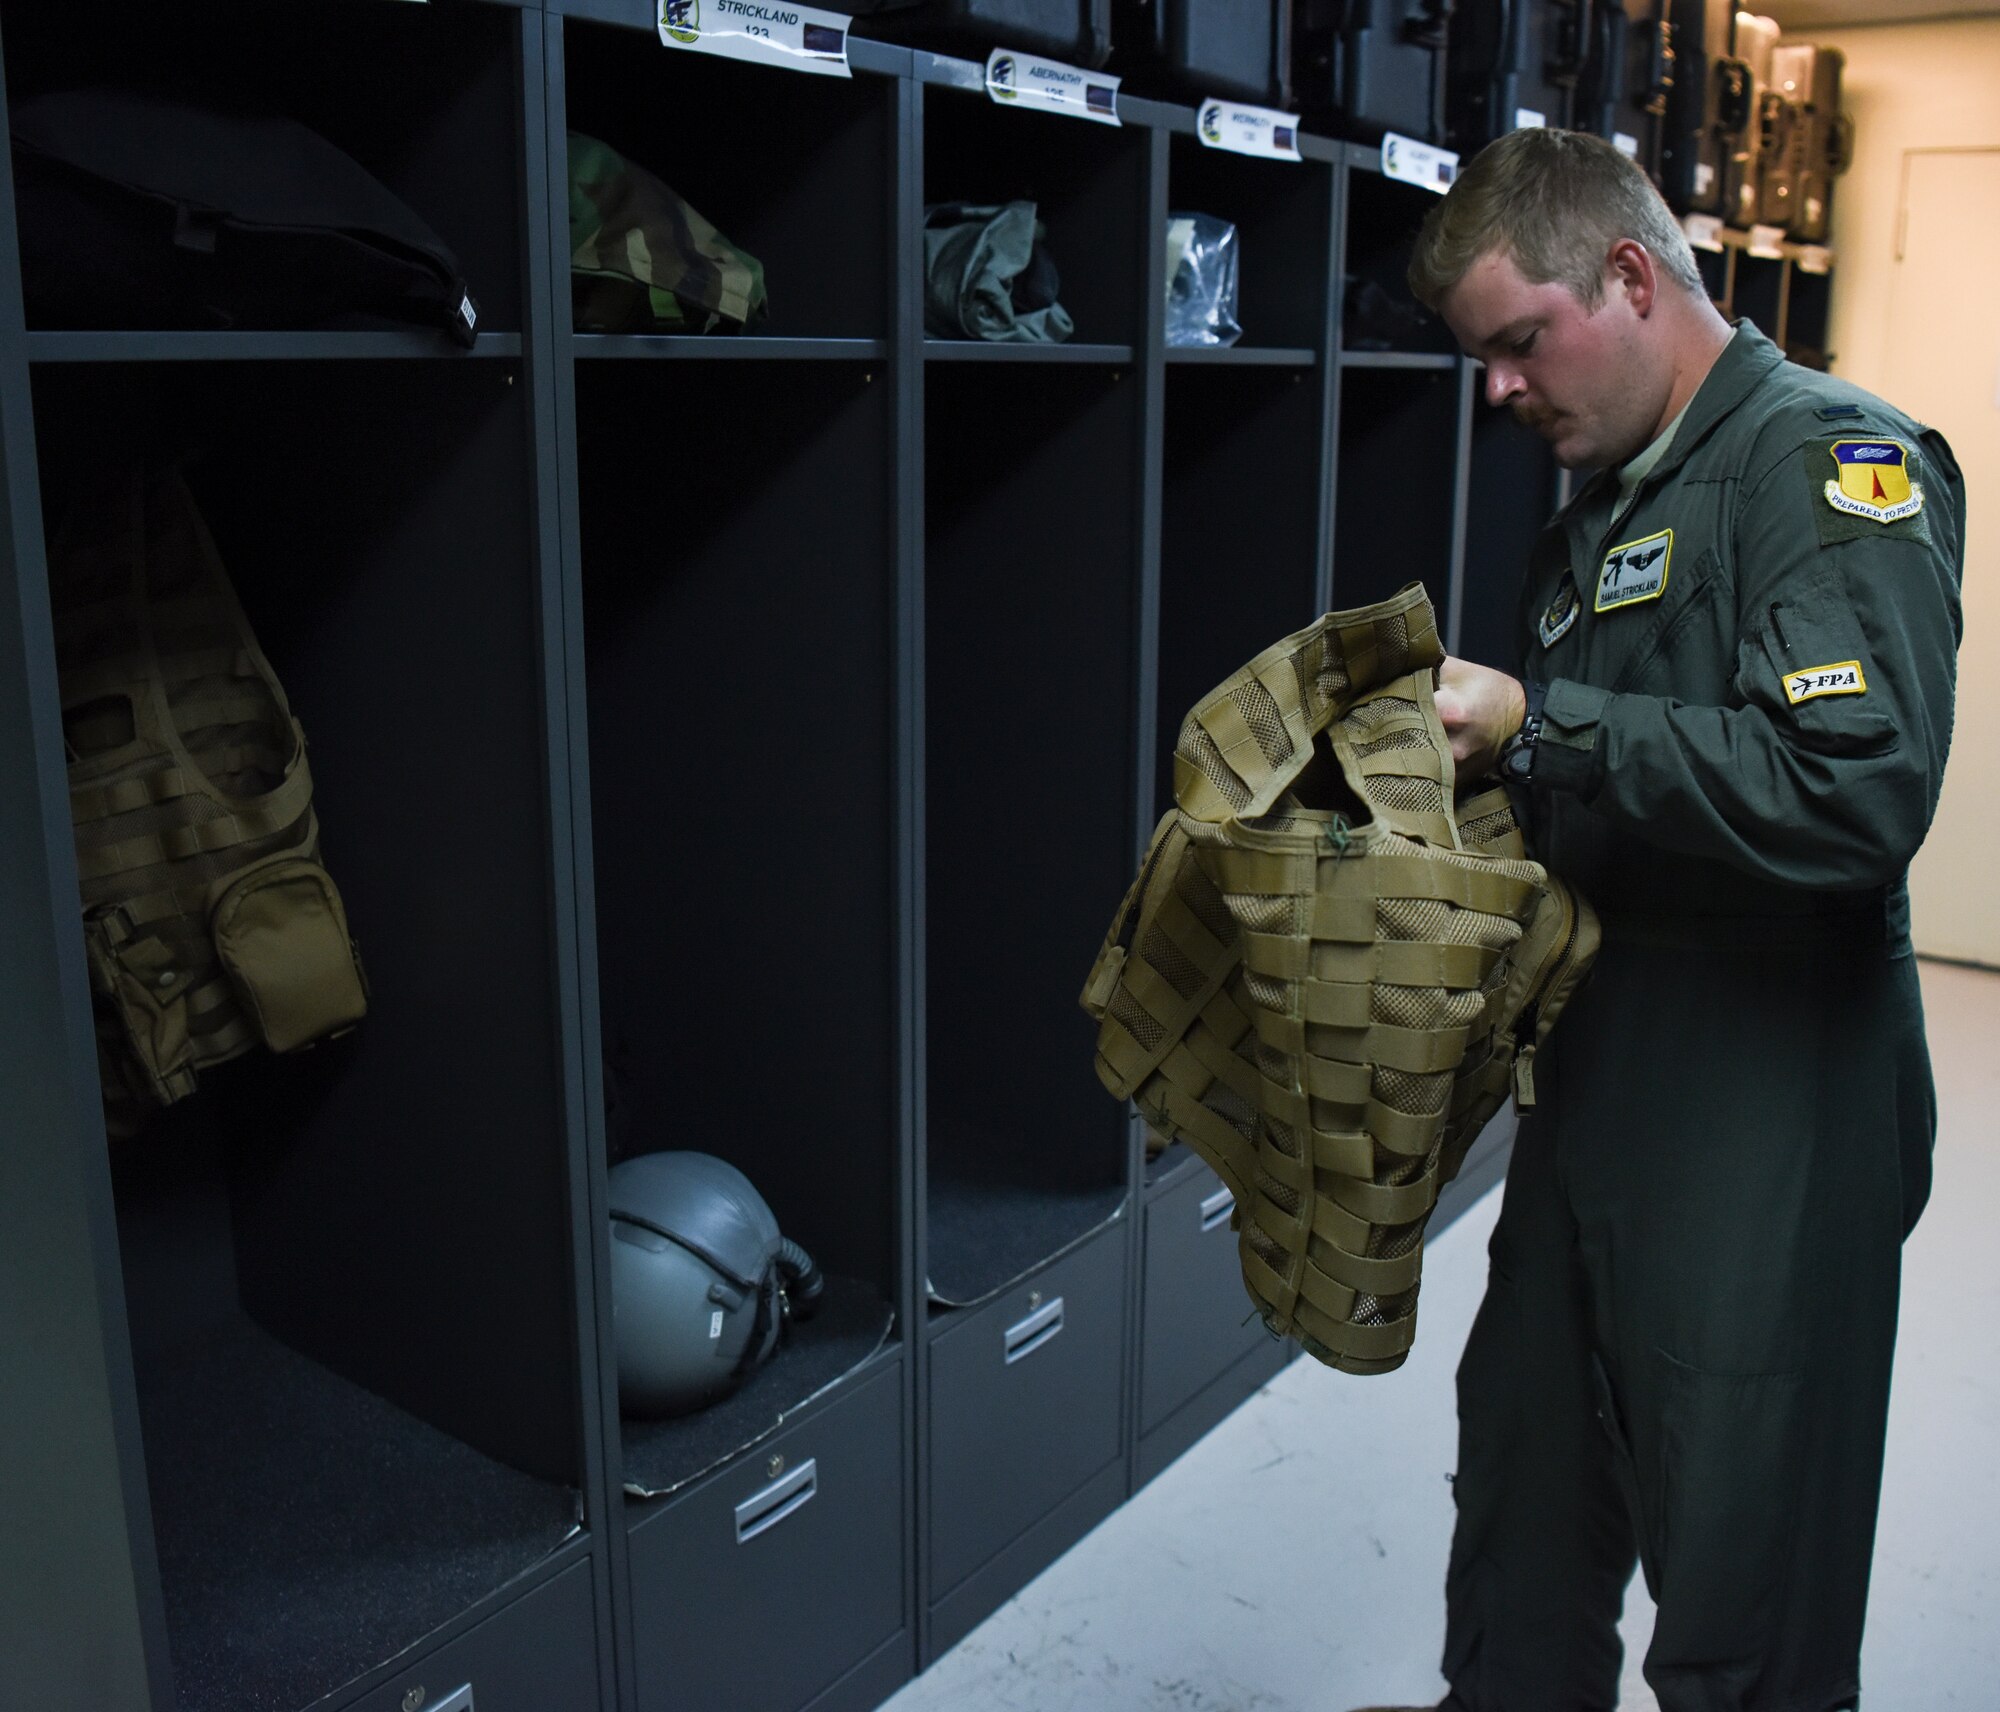 1st Lt. Sam Strickland, 69th Expeditionary Bomb Squadron electronic warfare officer, prepares to don an air save vest on Andersen Air Force Base, Guam, Oct. 22, 2019. Strickland, along with other 69th EBS aircrew Airmen, are deployed to Andersen to complete the Continuous Bomber Presence mission. The CBP builds trust with our allies by strengthening and maintaining peace in the Indo-Pacific, while advocating our ability to protect our allies interest as well as our own. (U.S. Air Force photo by Airman 1st Class Michael S. Murphy)